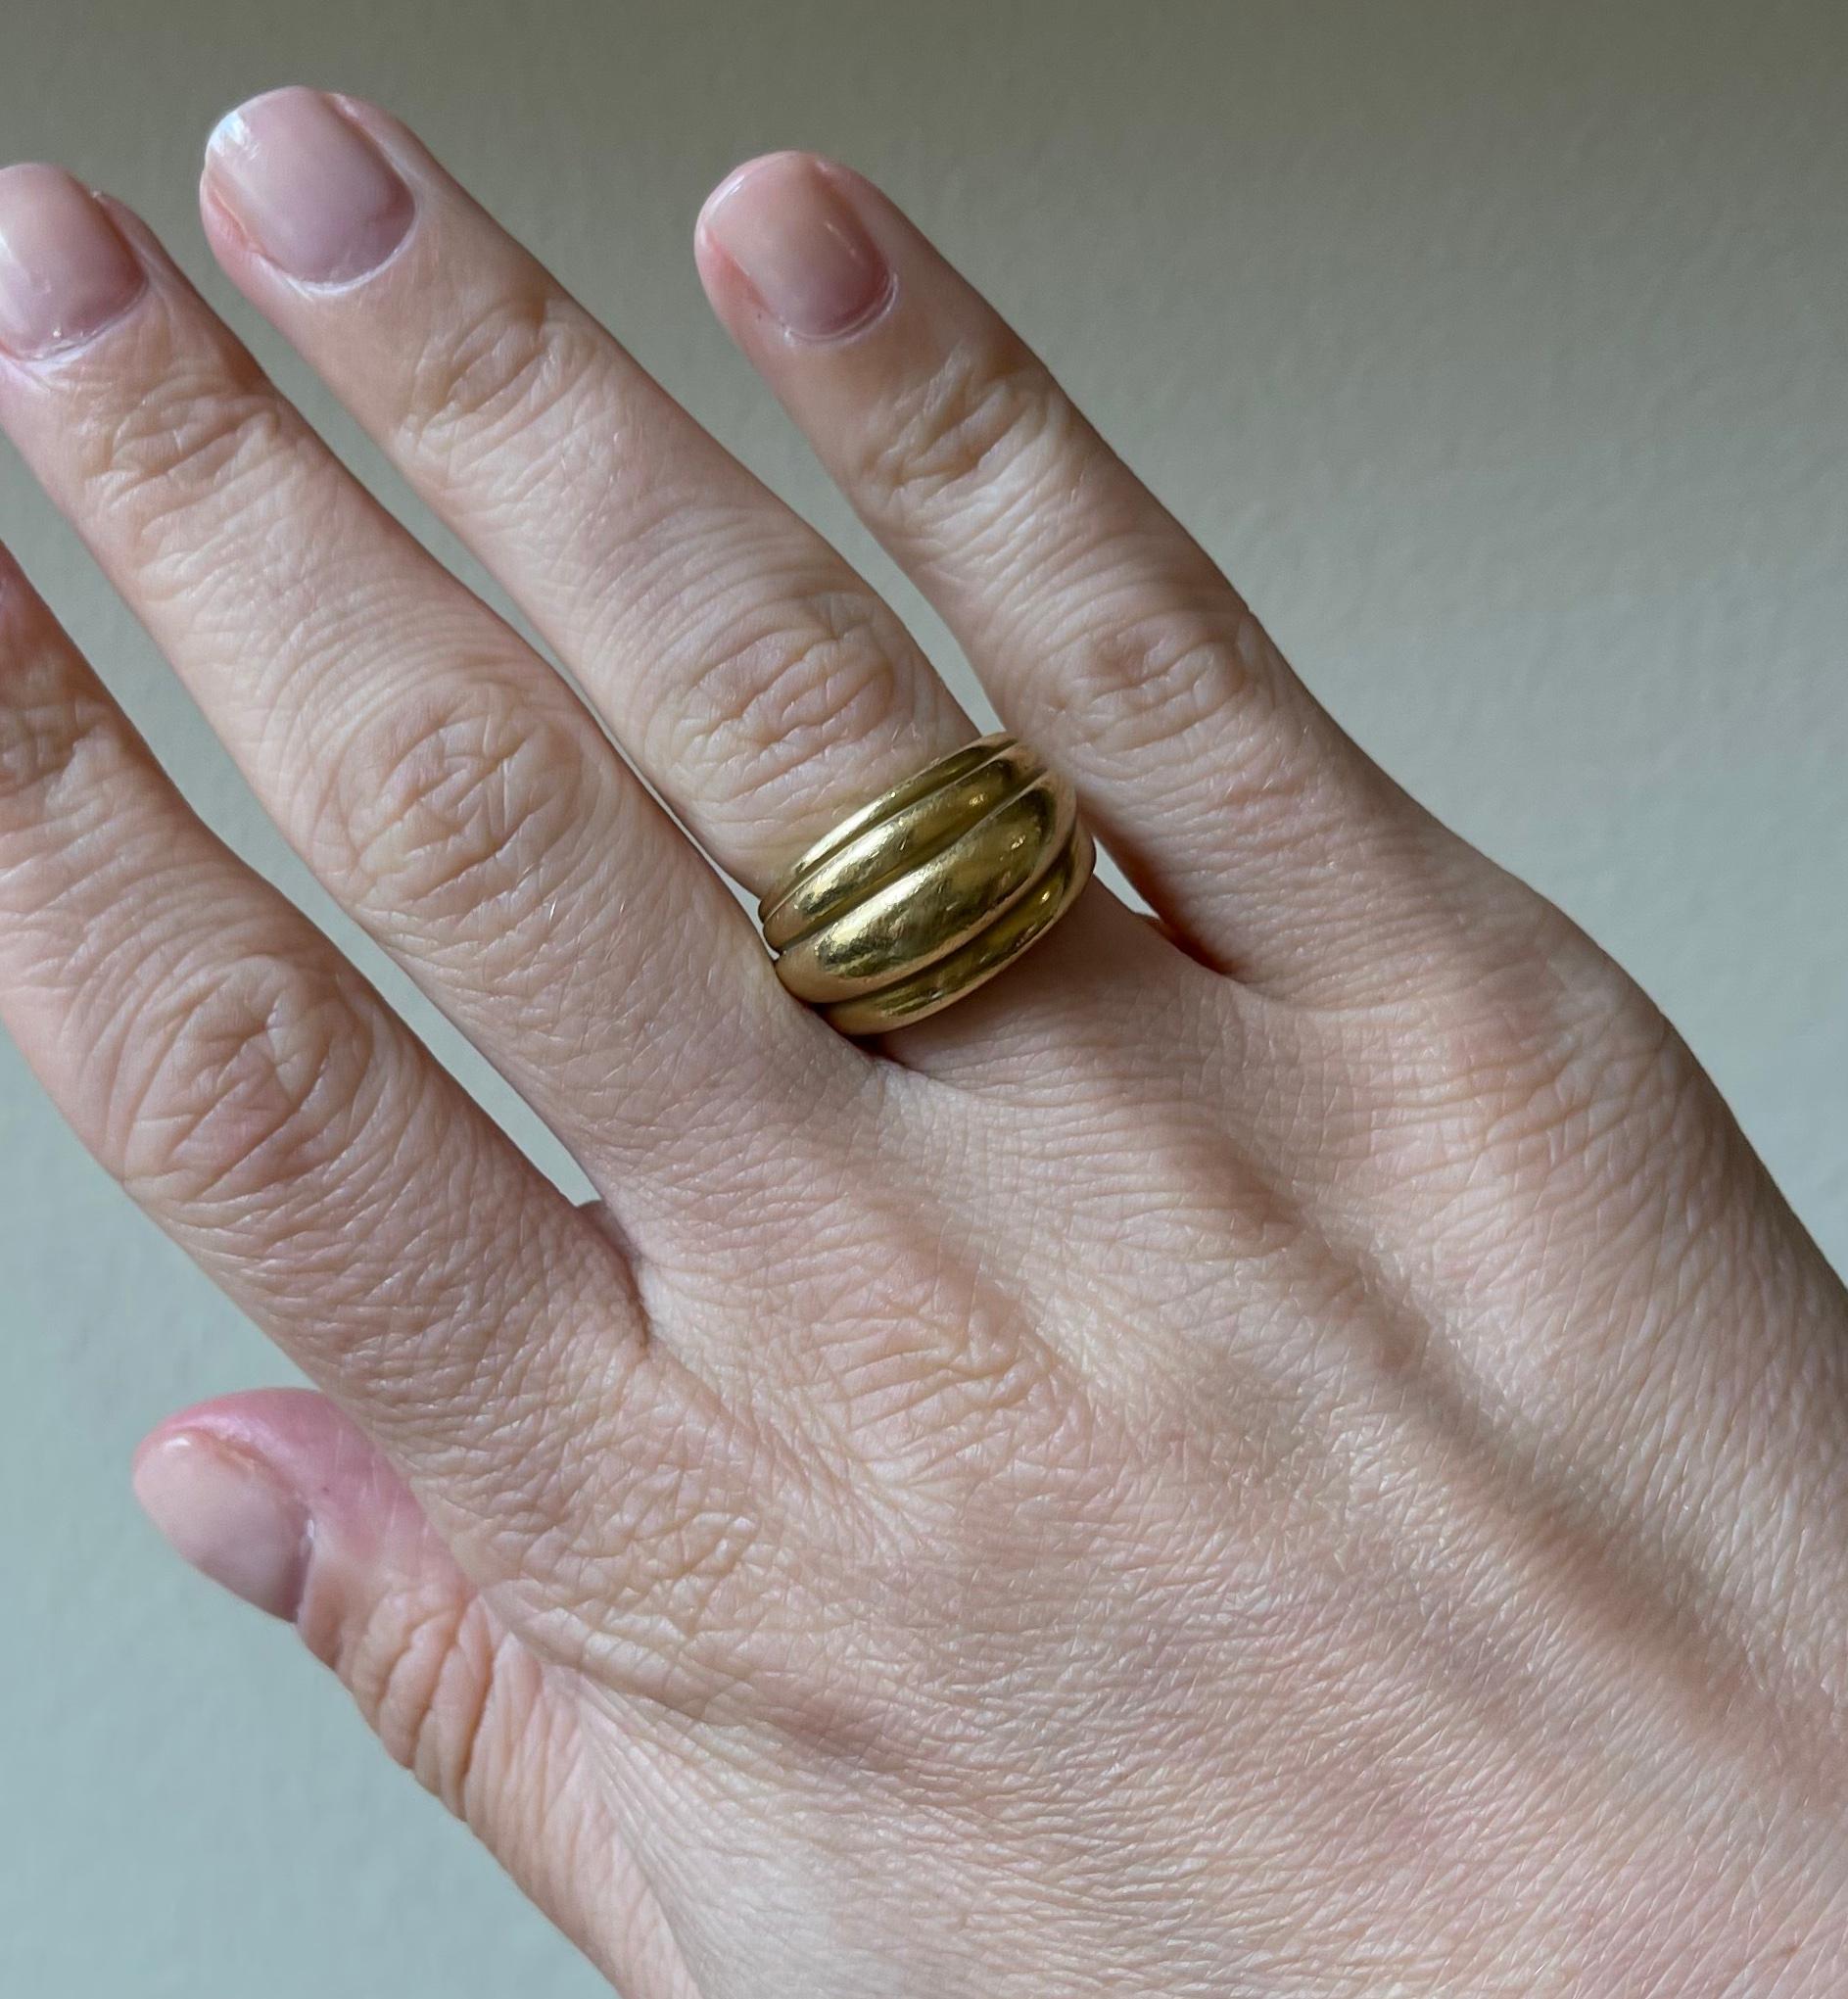 Classic 18k gold dome ring by Barry Kieselstein-Cord. The ring is a size 6, width of the center is 0.5